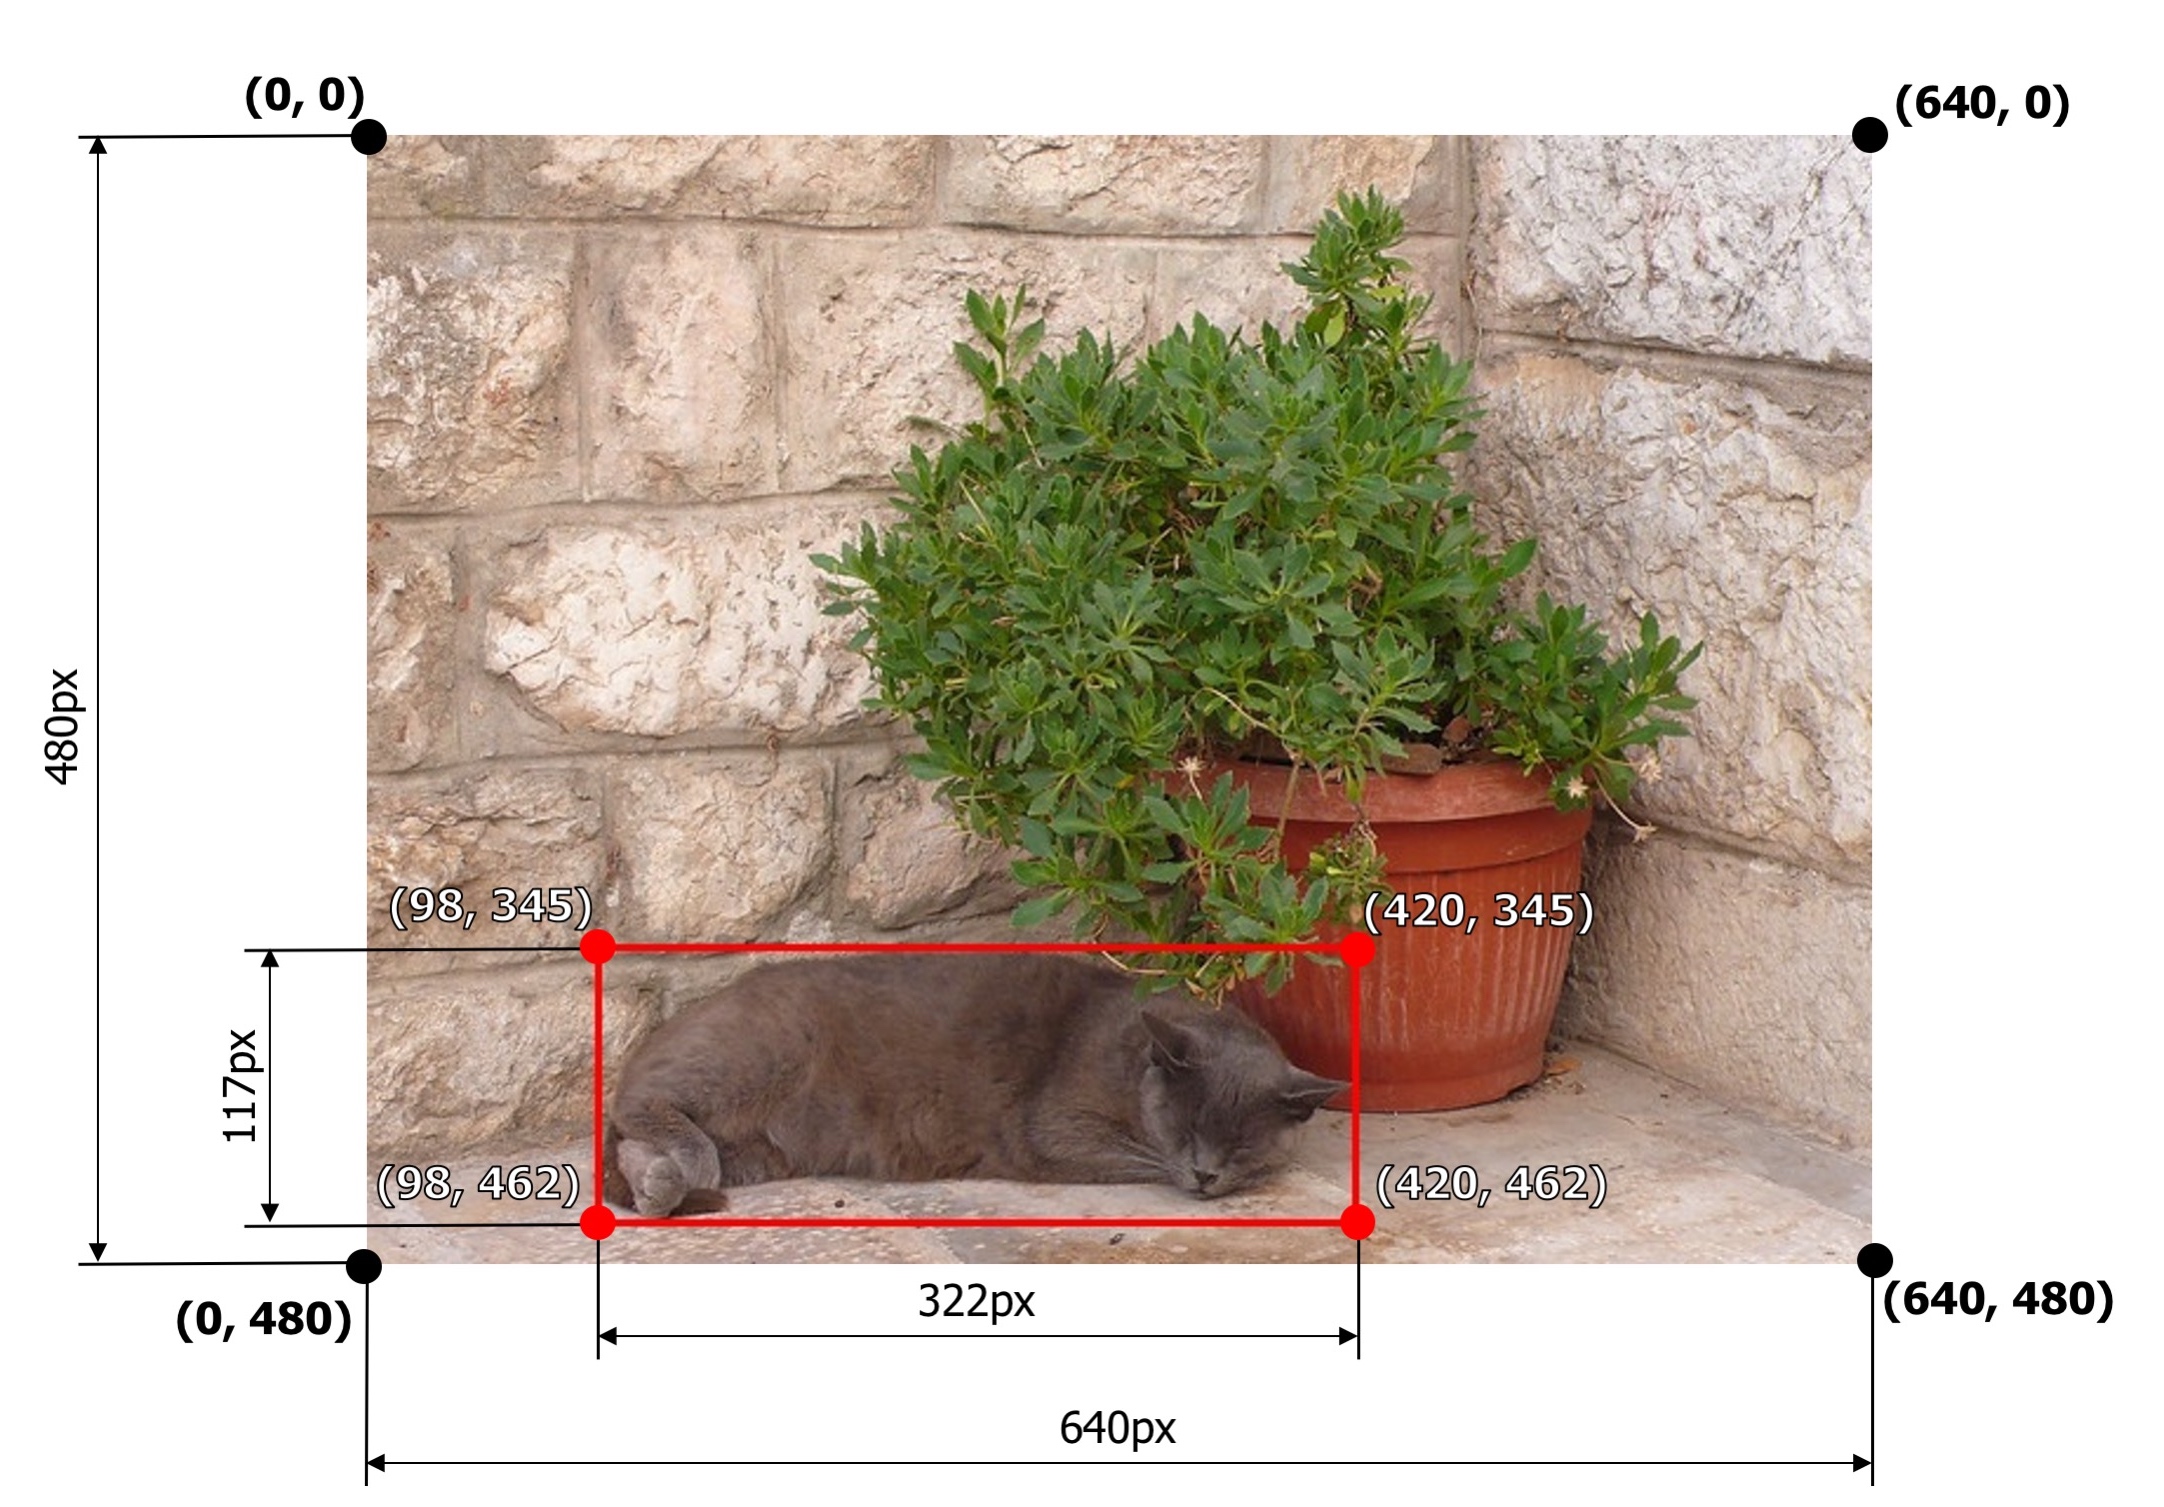 An example image with a bounding box from the COCO dataset